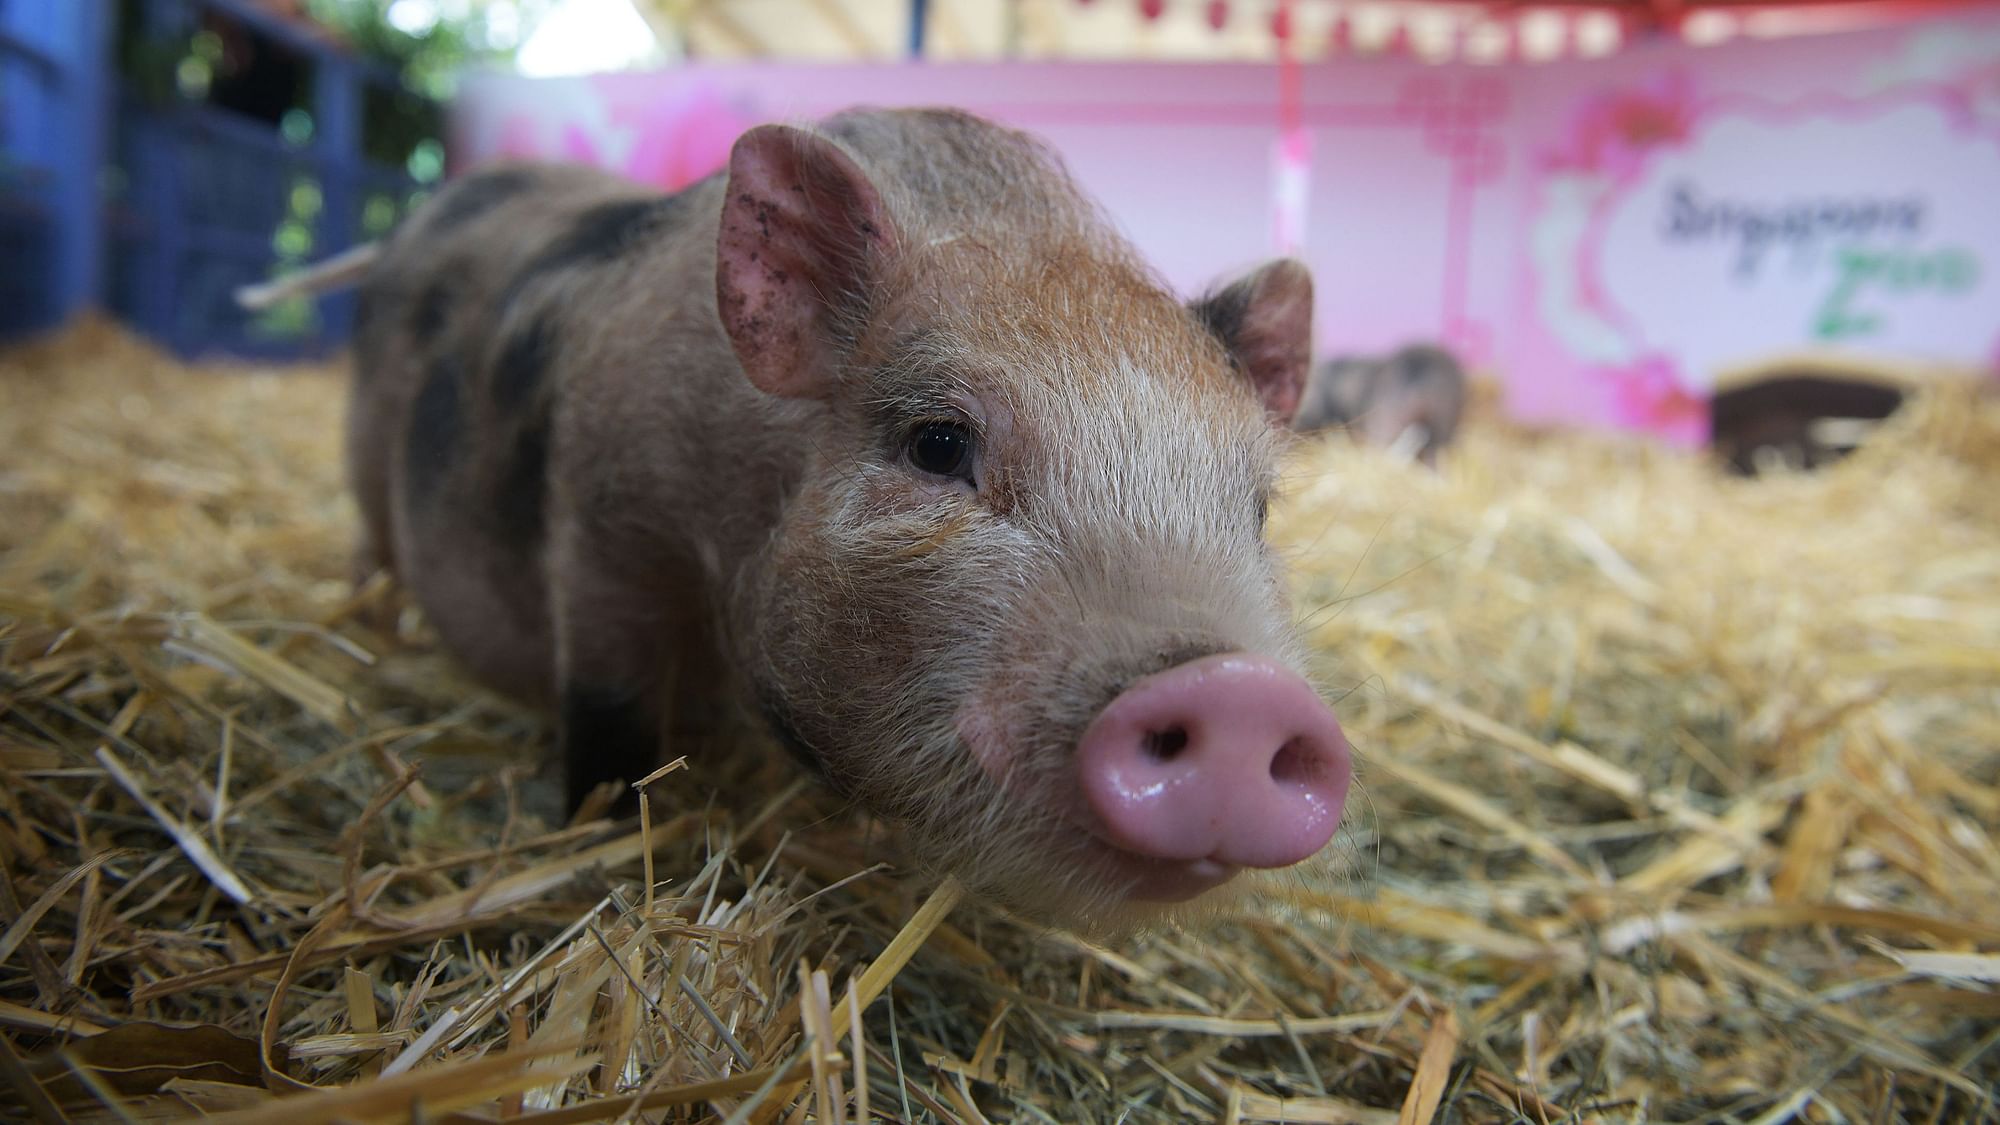 US scientists have partially revived pig brains four hours after the animals were slaughtered.